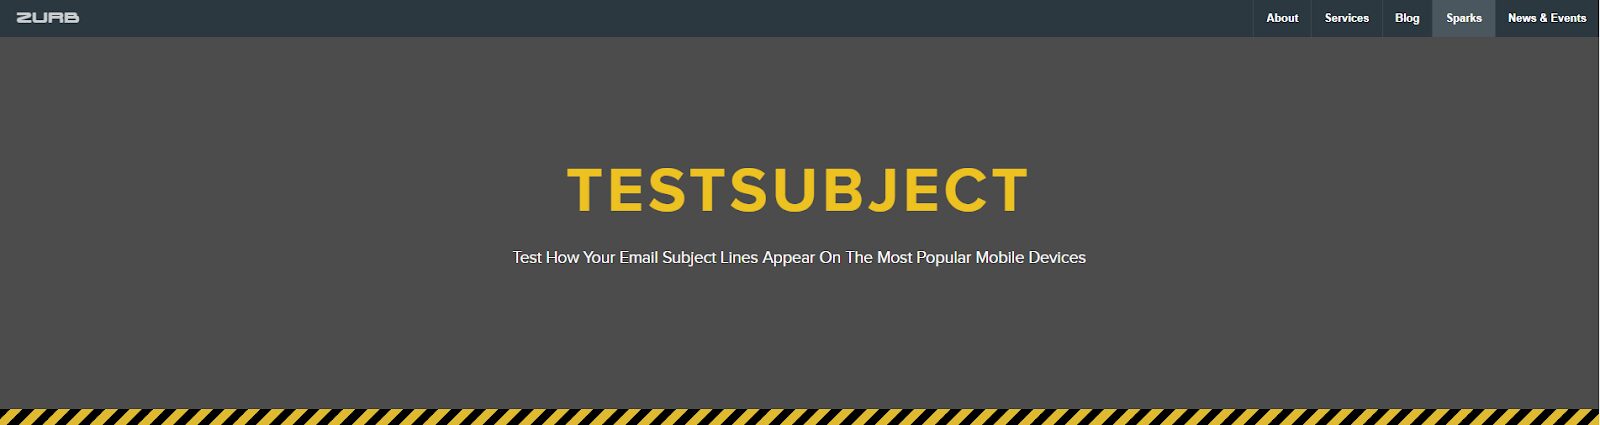 test subjects-welcome emails